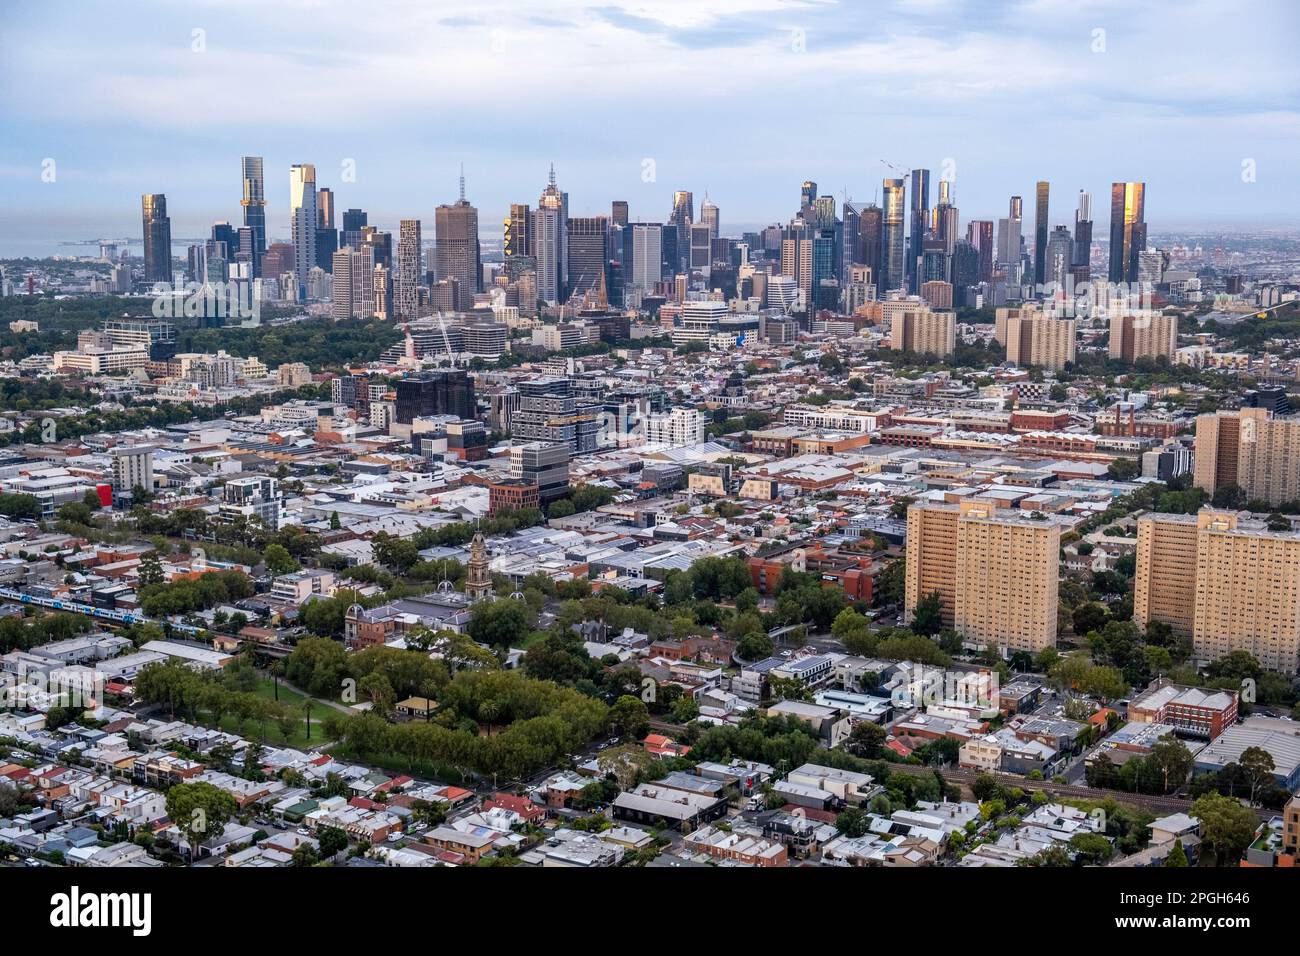 Aerial view of the Melbourne city skyline and suburbs. Melbourne, Victoria, Australia Stock Photo